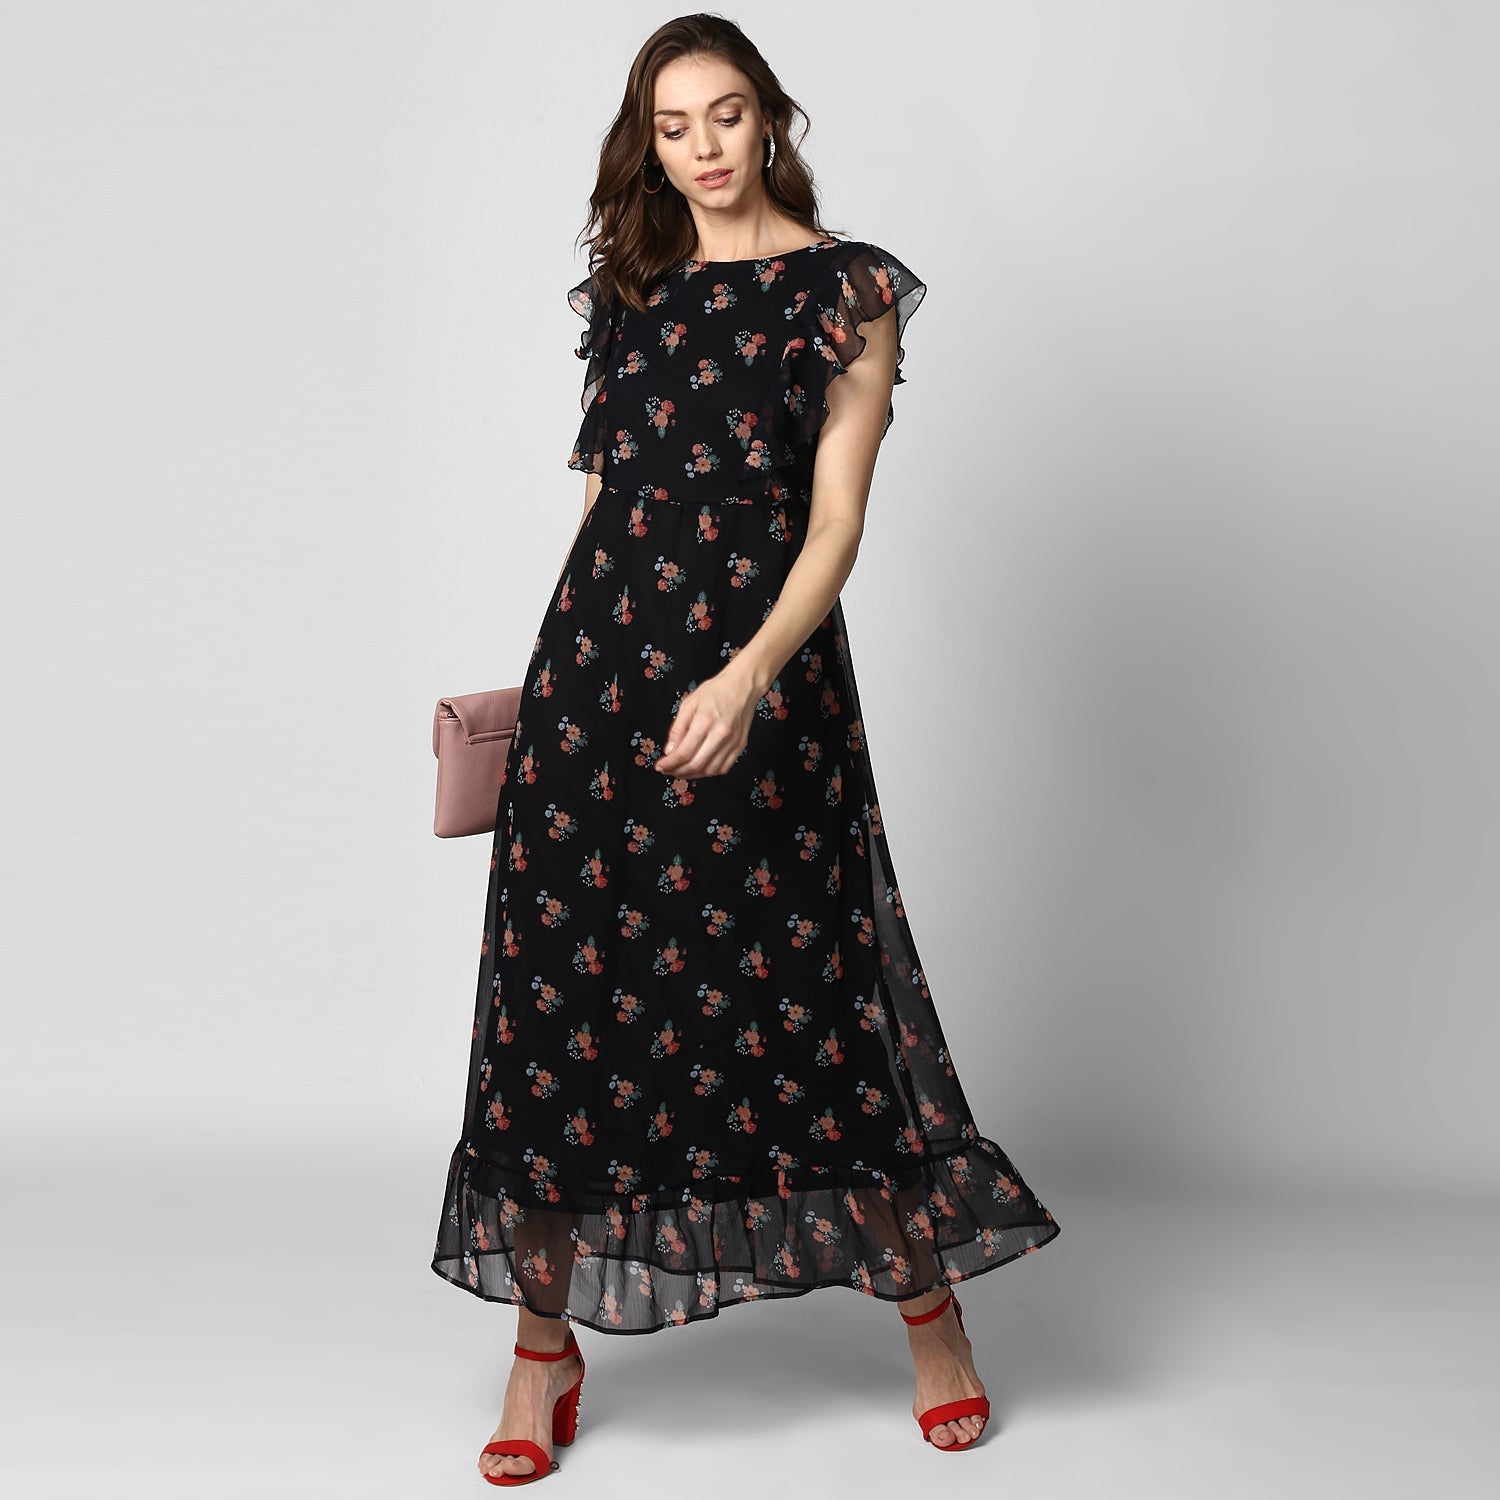 Women's Black Printed Maxi Dress with Lining - Final Clearance Sale